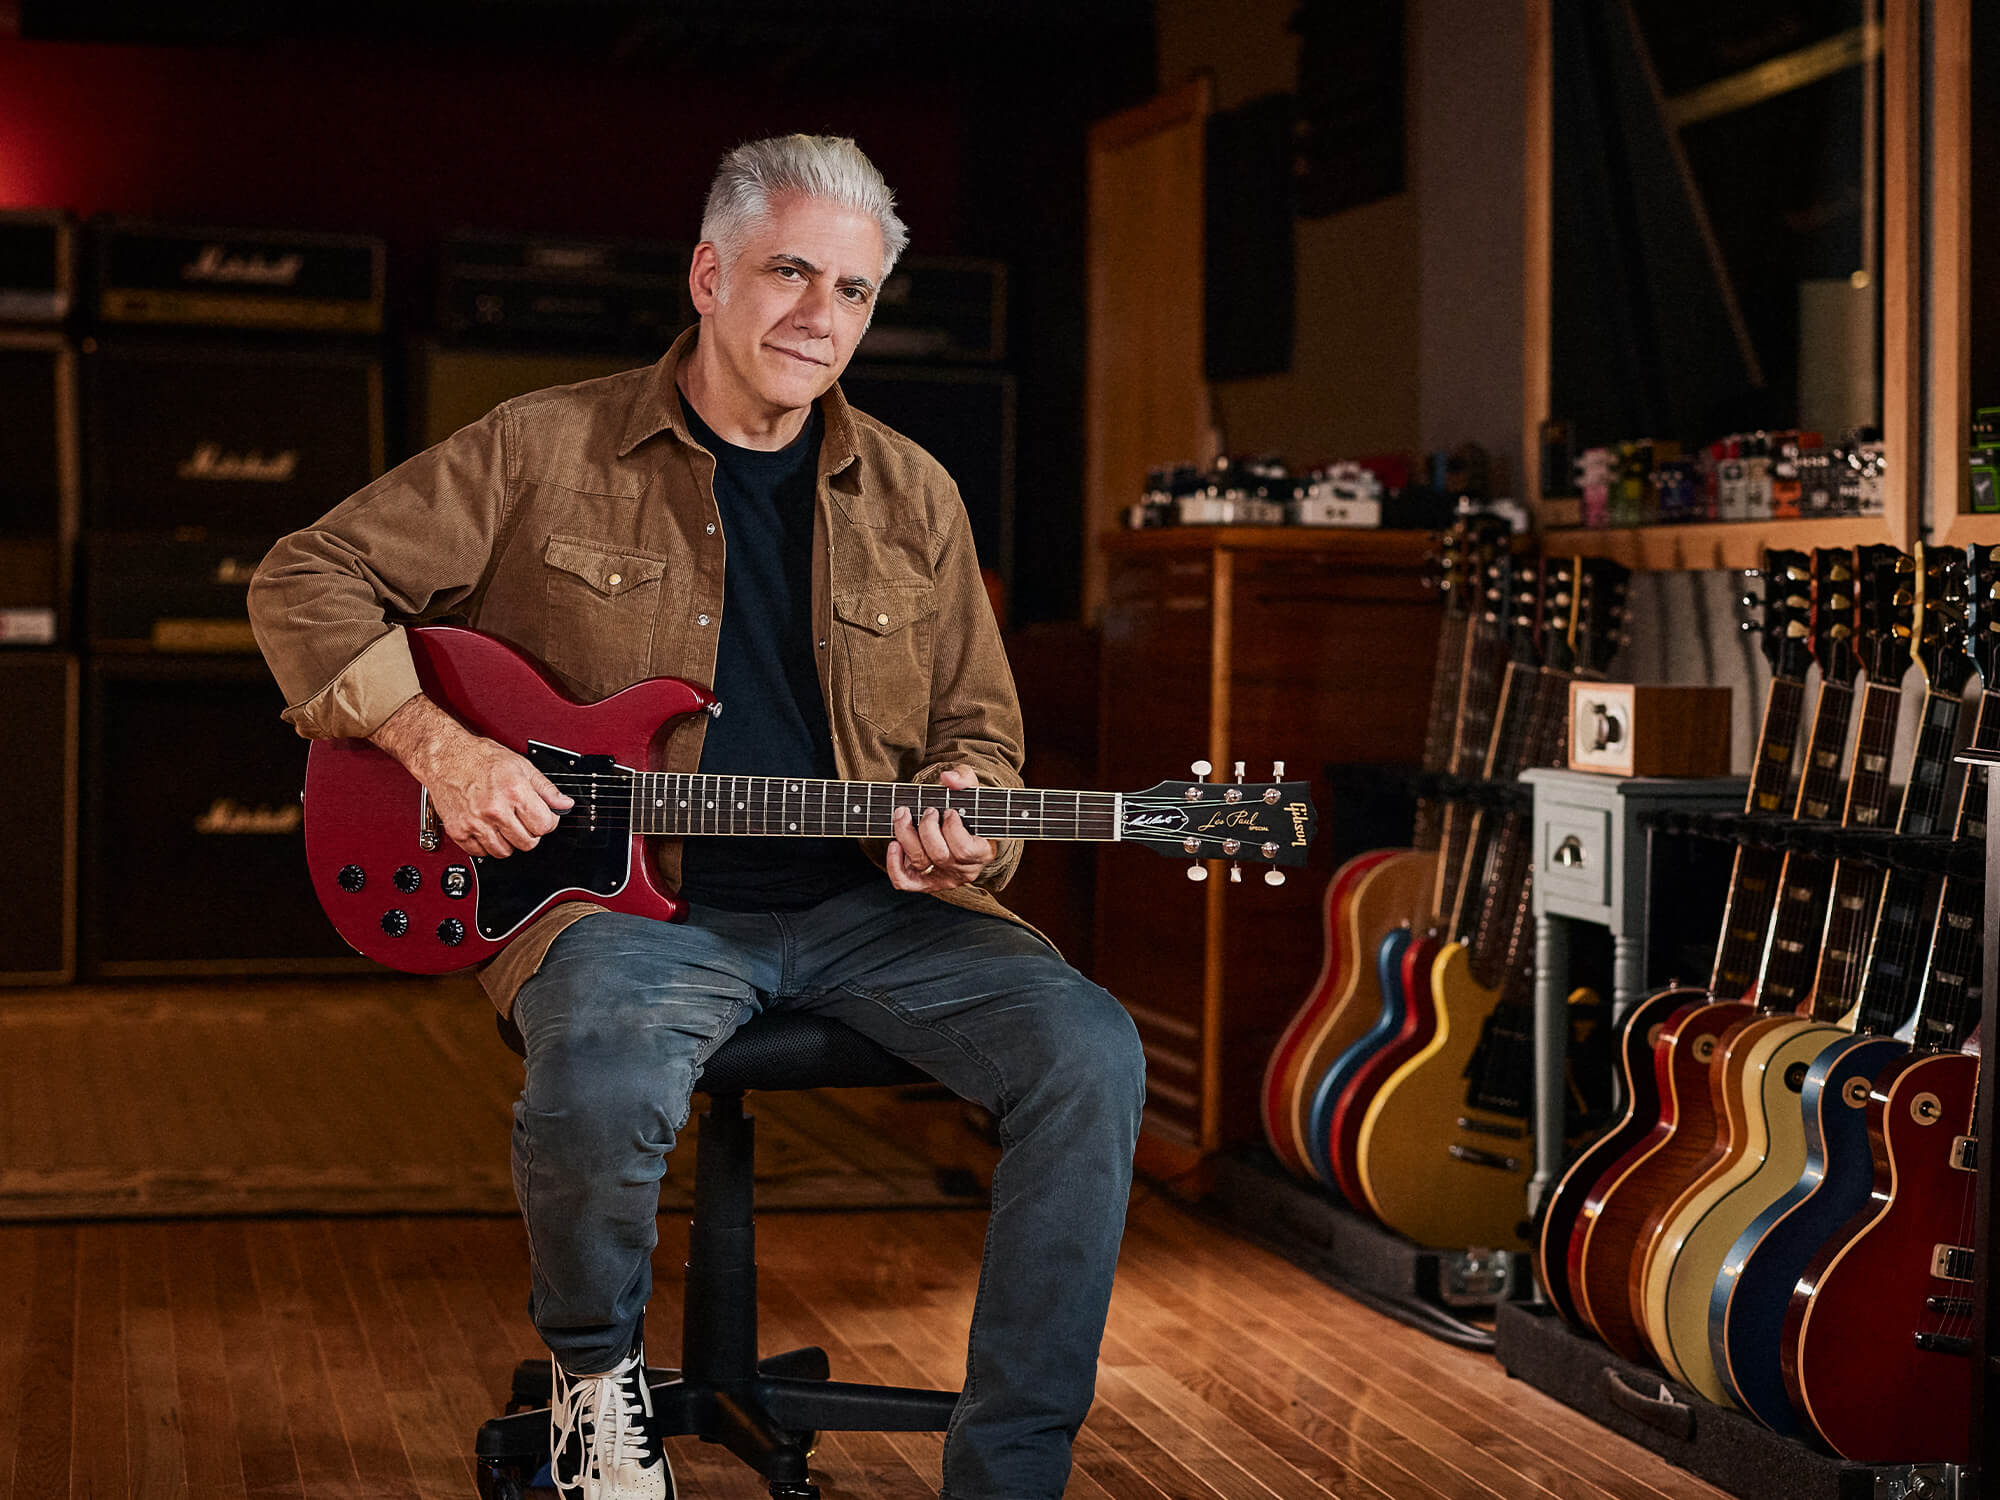 Rick Beato sitting down holding his Burgundy Les Paul Special. He's looking directly at the camera with a slight smile.